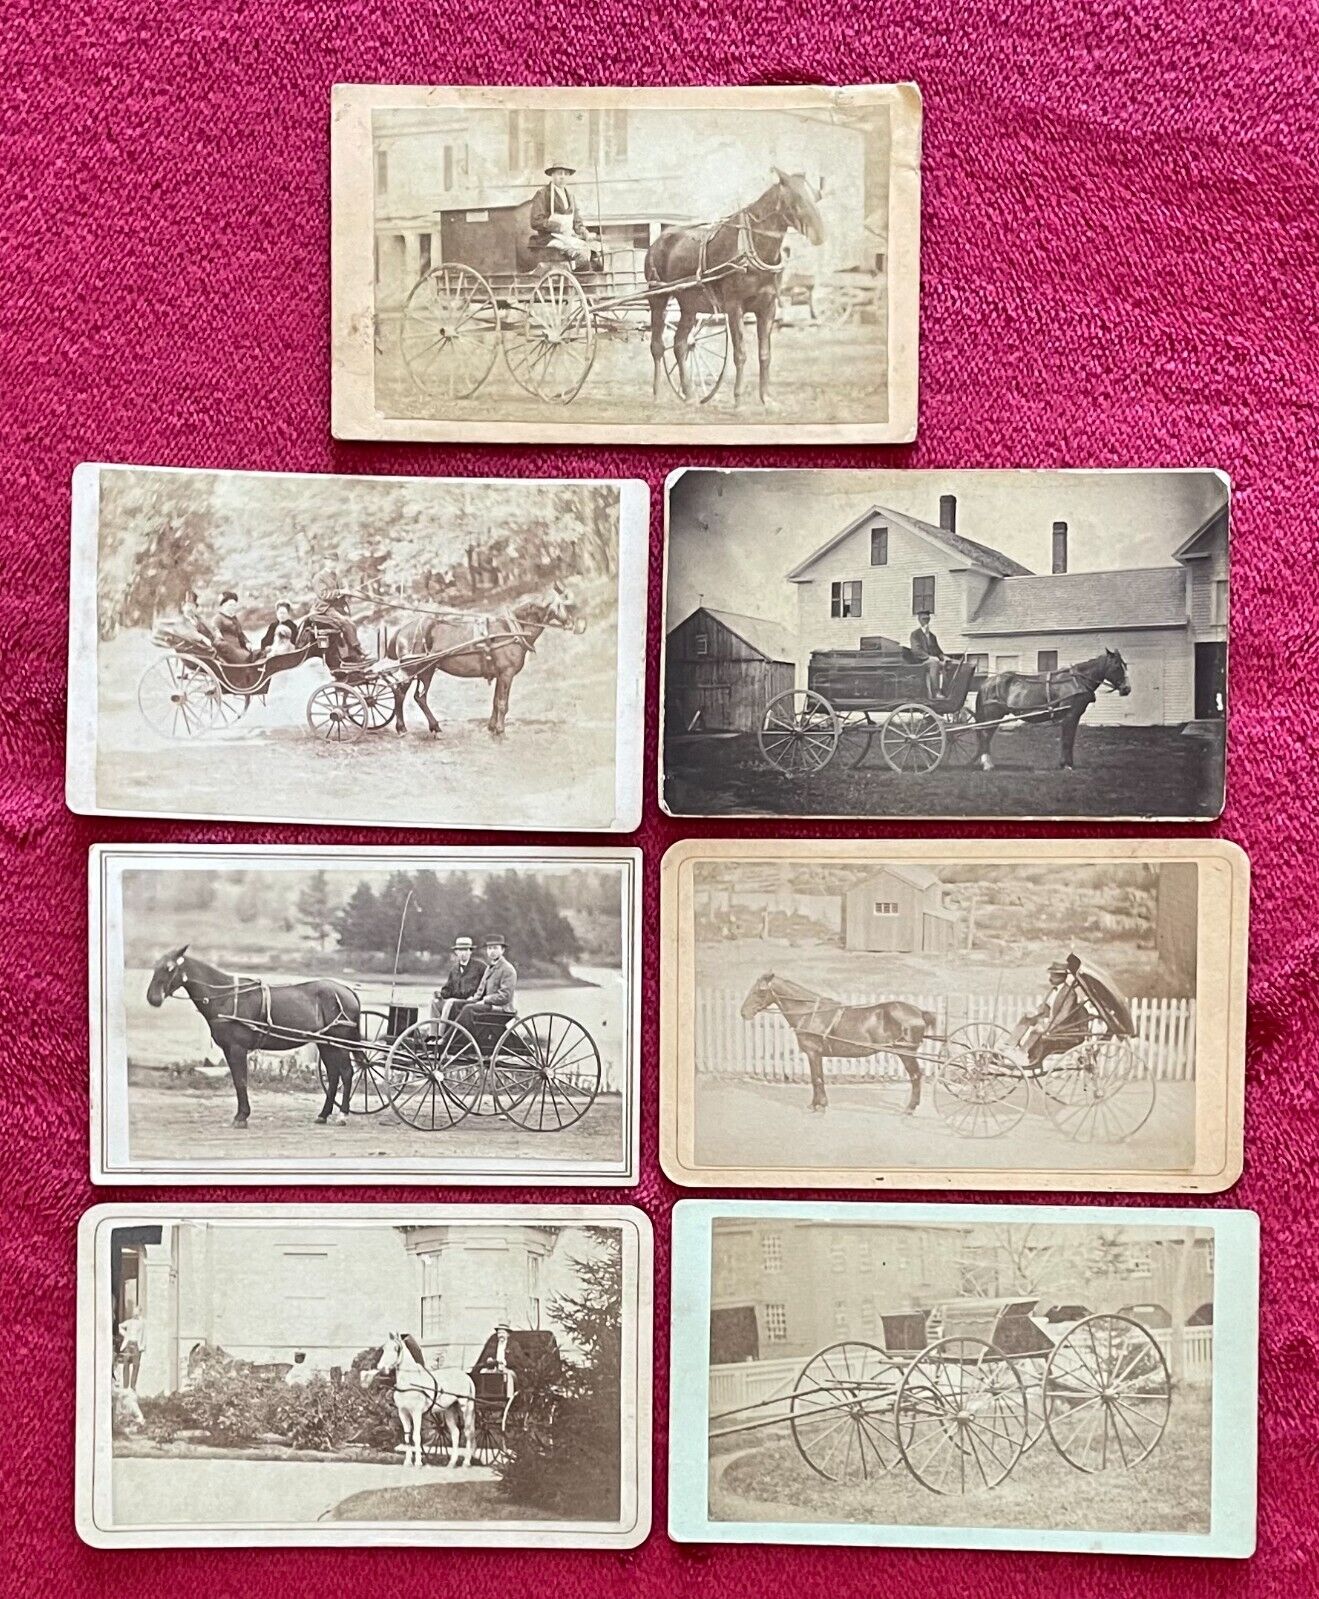 HORSE DRAWN CARRIAGES - DELIVERY WAGON - FUNERAL CARRIAGE ? - 7 CDV PHOTOGRAPHS